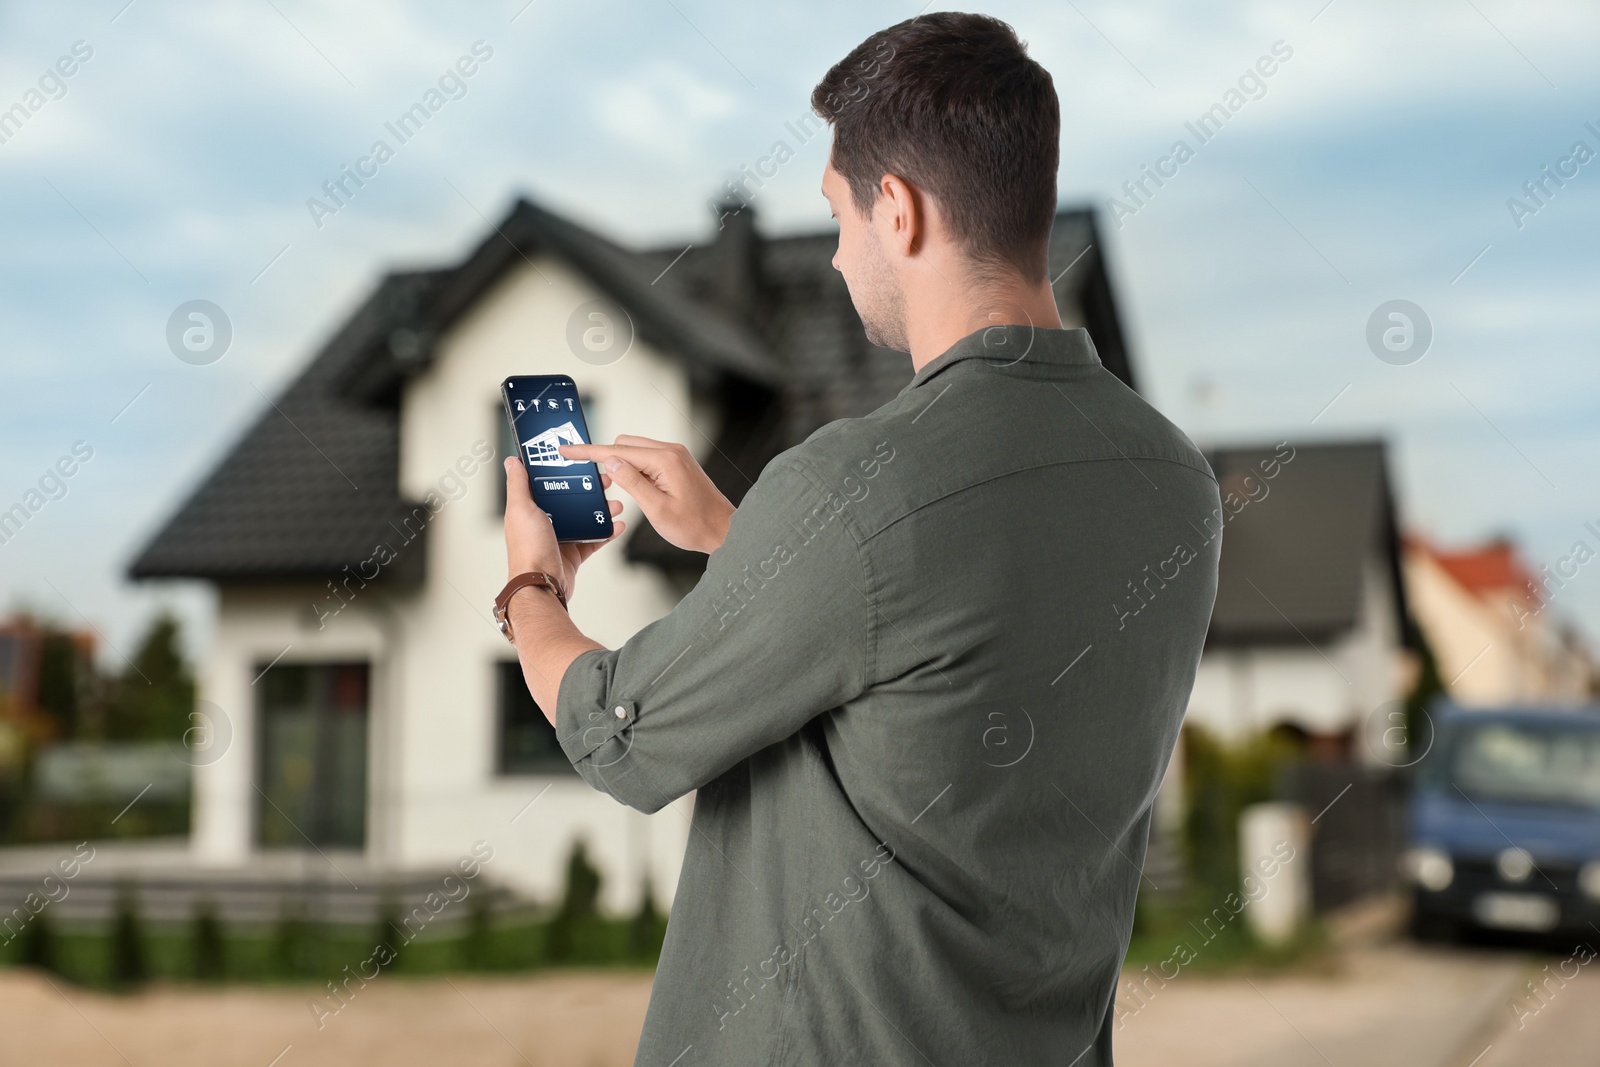 Image of Man using home security system application on smartphone outdoors